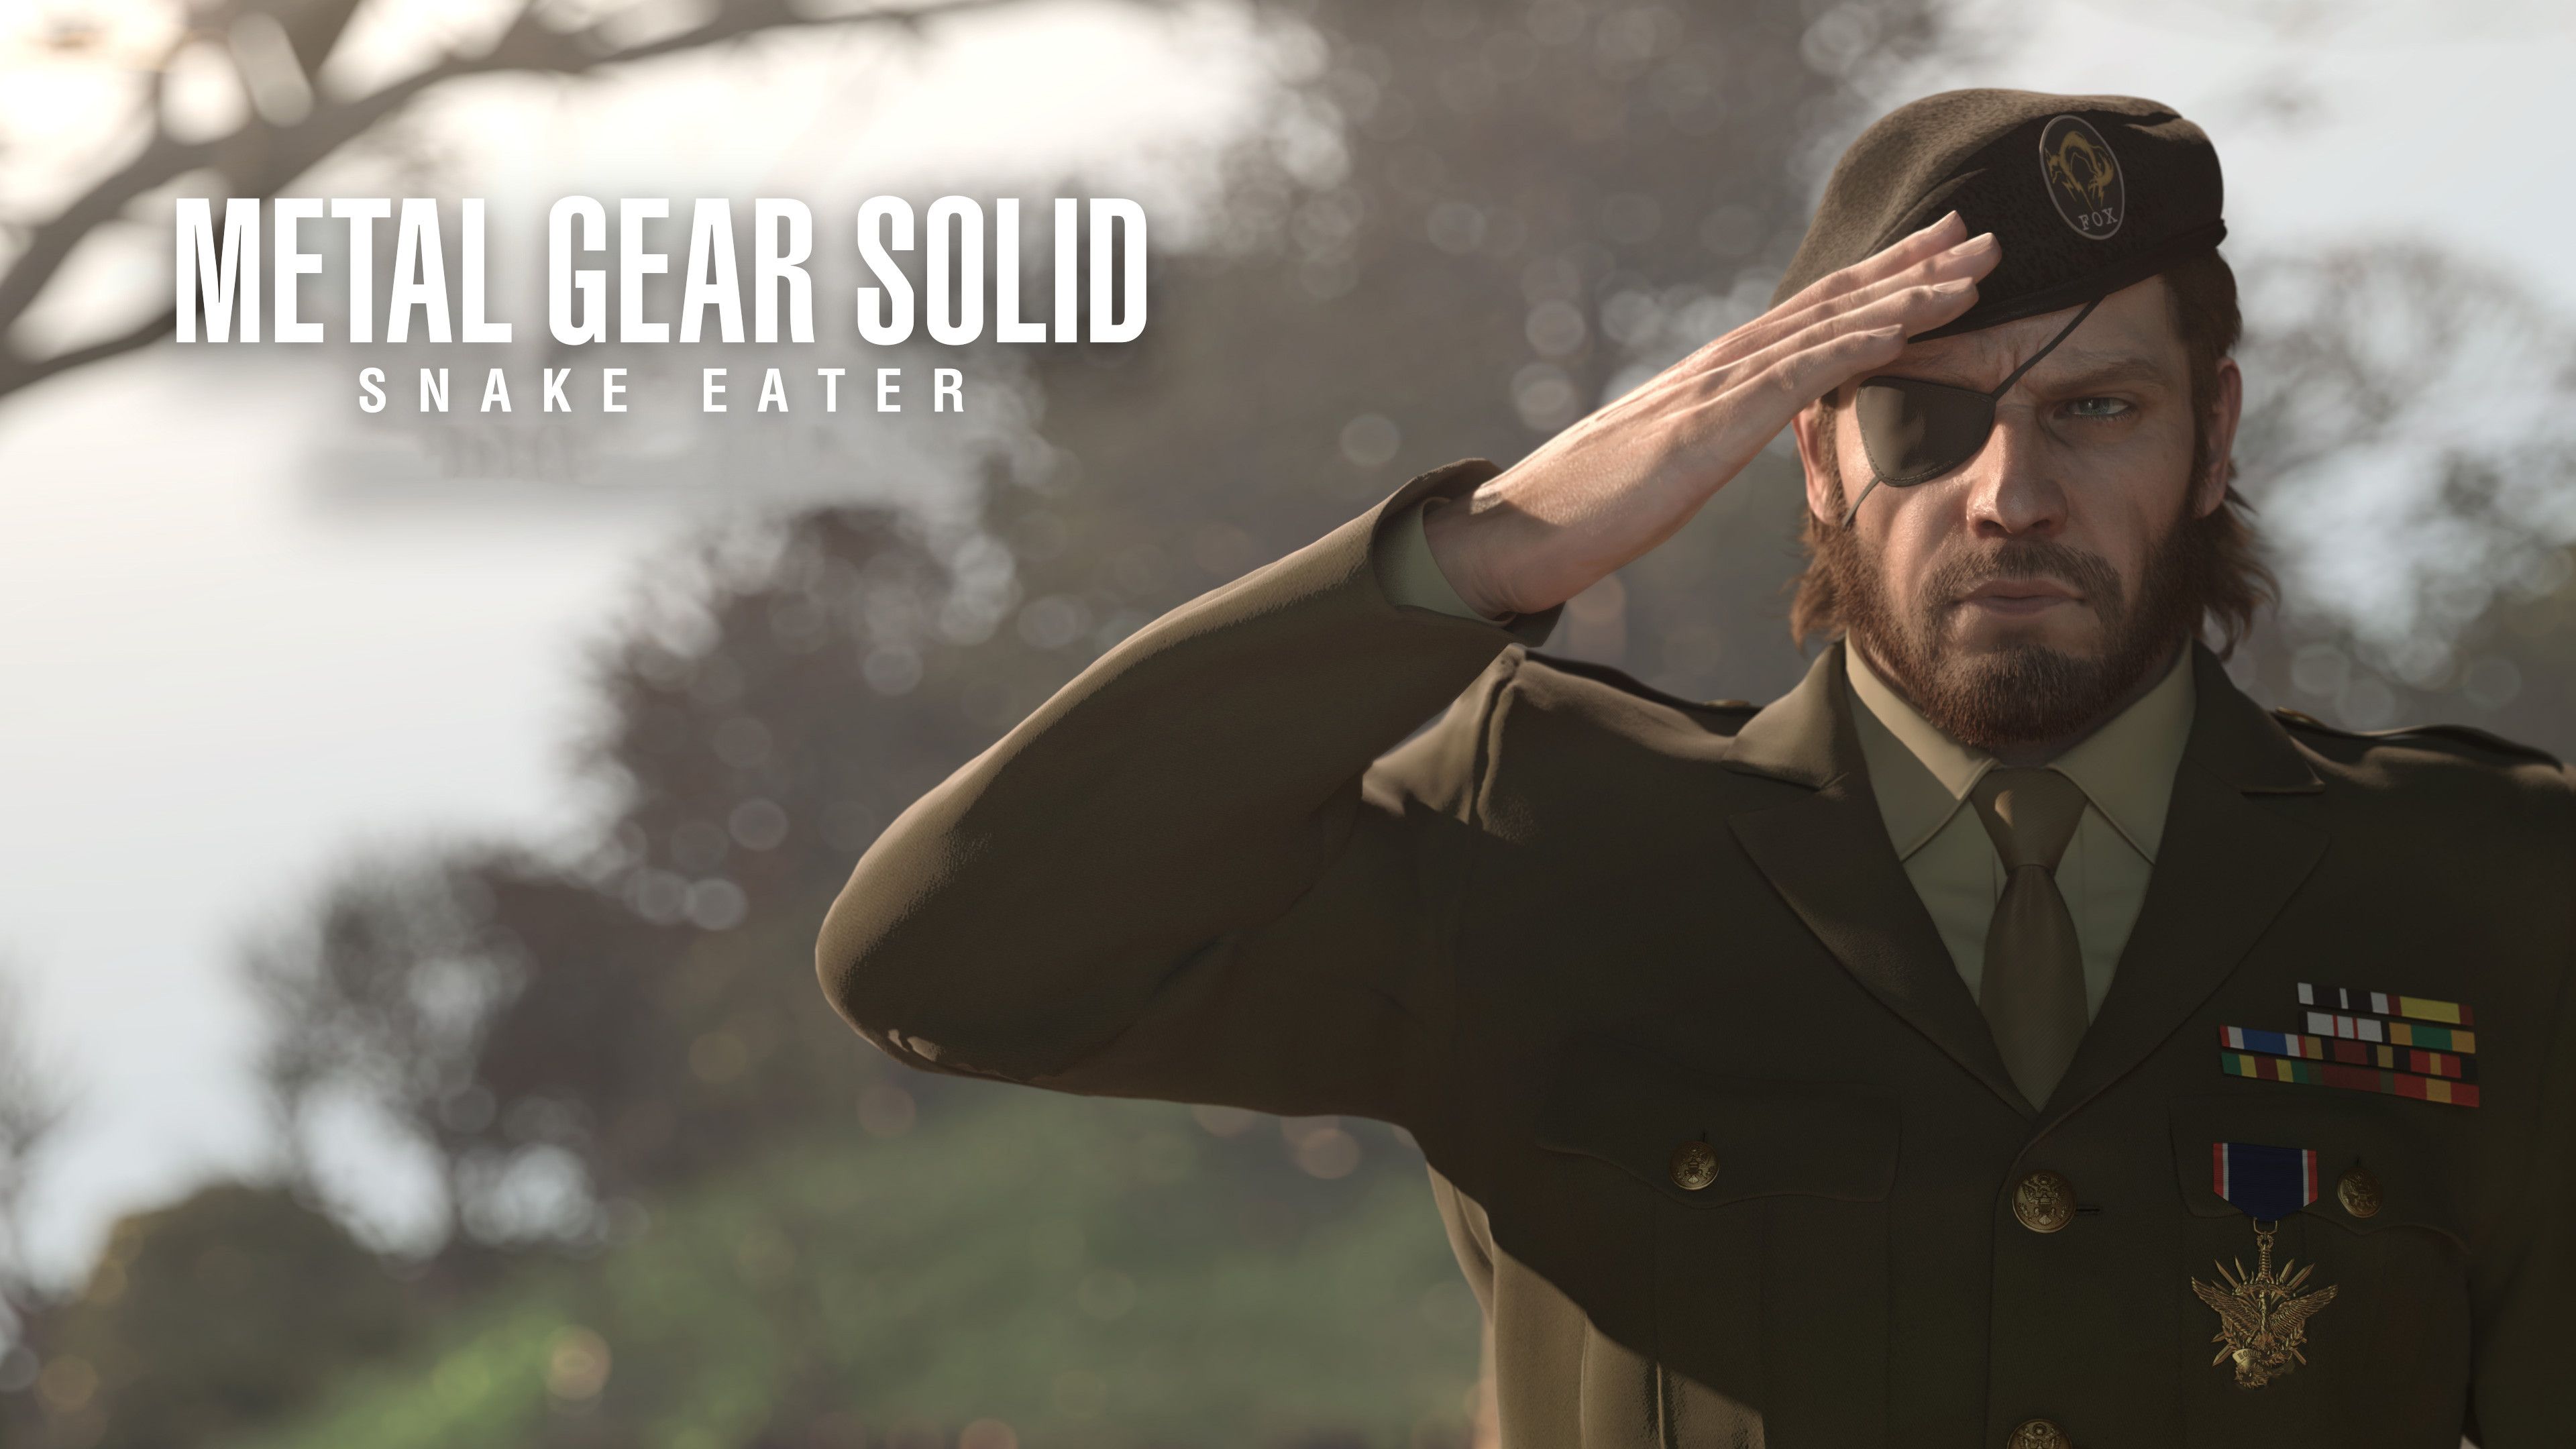 There I Fixed The Official Wallpaper For You Metalgearsolid Mgs